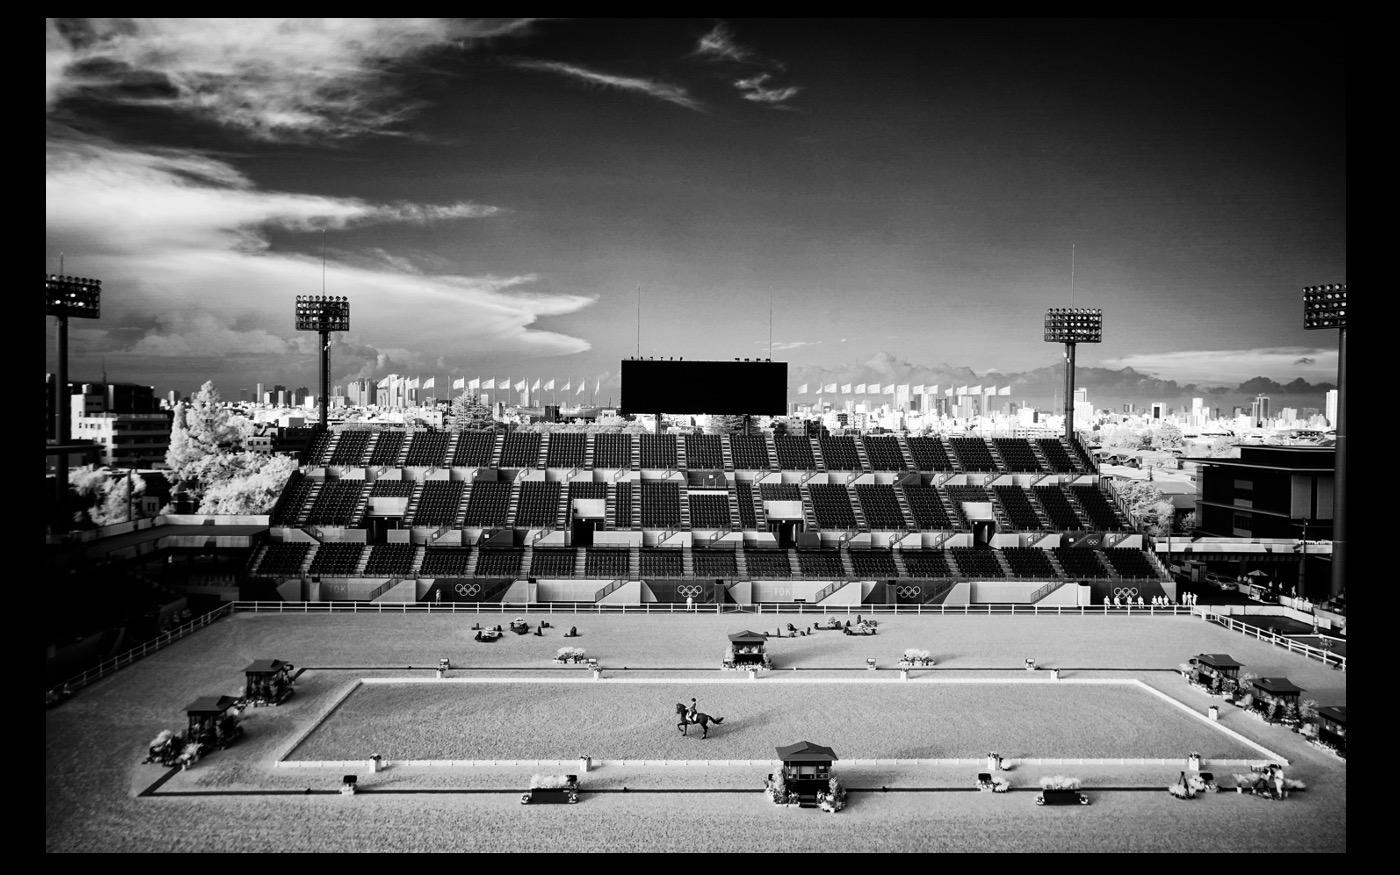 Olympics in the time of Covid: Tokyo Equestrian, with virtually no spectators in a new Equestrian Stadium  2021 : Looking Back: 60 Years of Photographs : David Burnett | Photographer